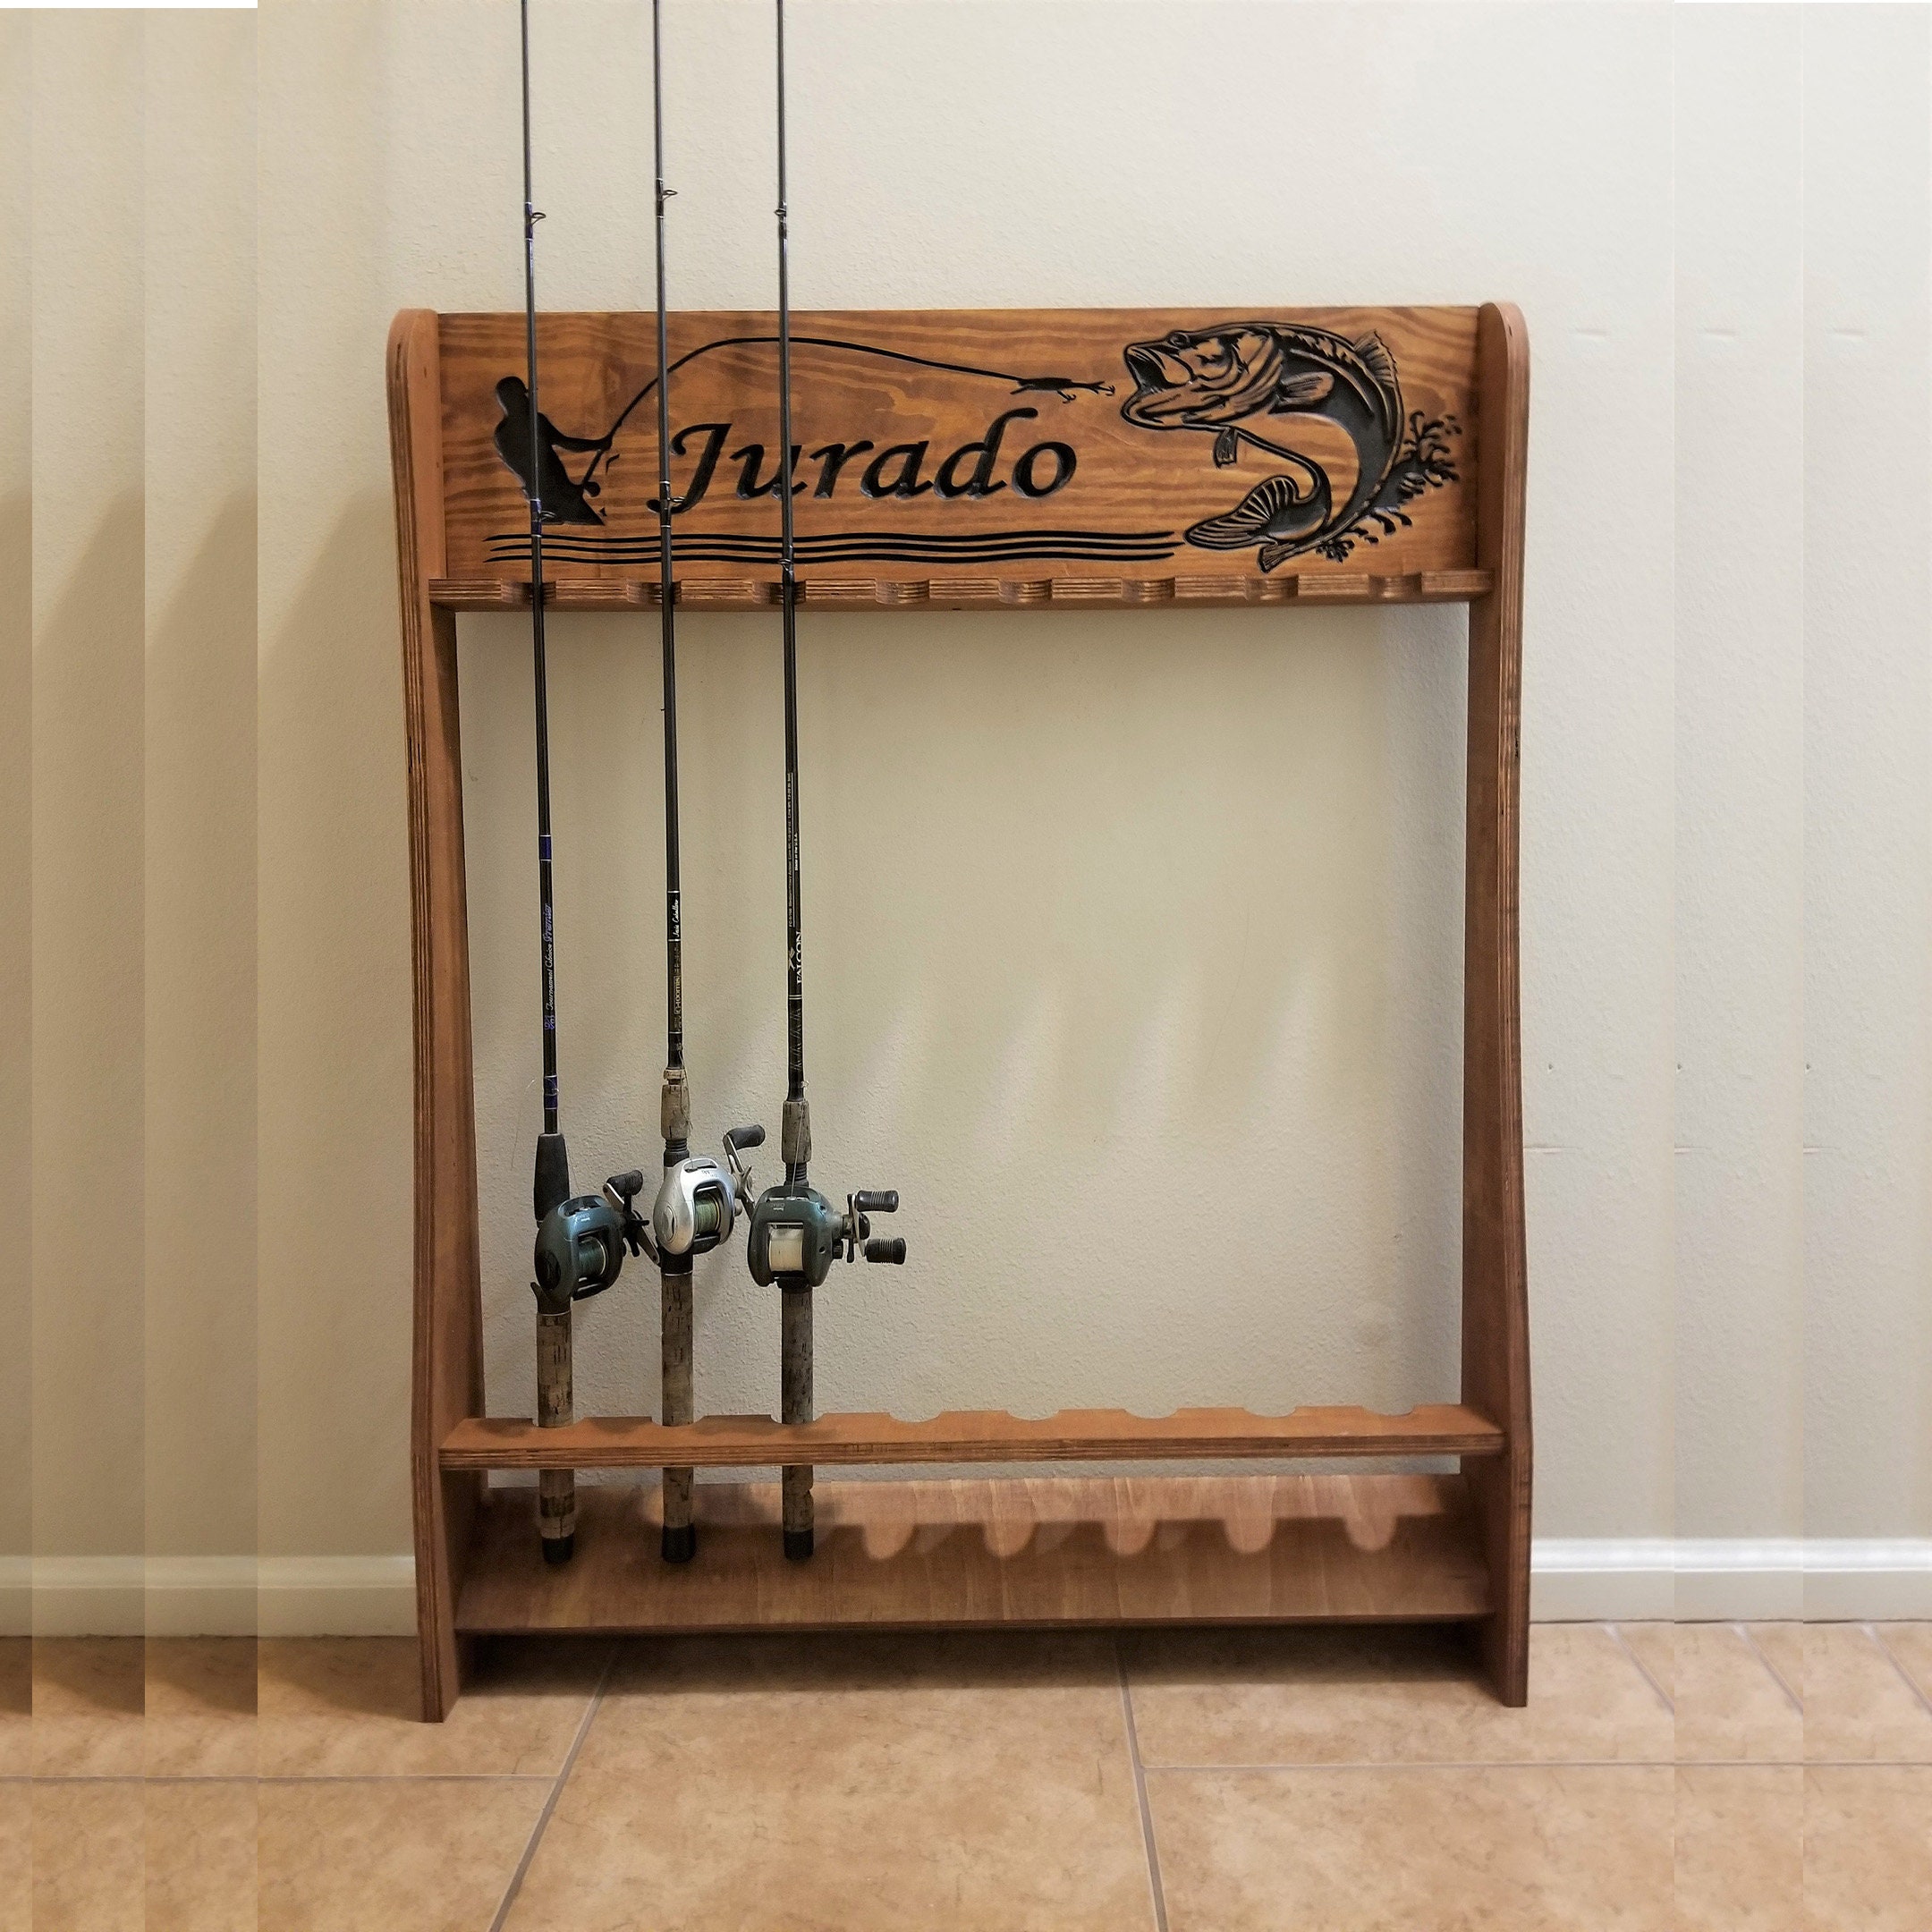 Fishing Rack, Carved Rod Rack, Fishing Pole Holder, Rod Rack, Father's Day,  Gift for Fisherman, Birthday Gift, Sea Racks, Fishing Rod Rack -  Canada